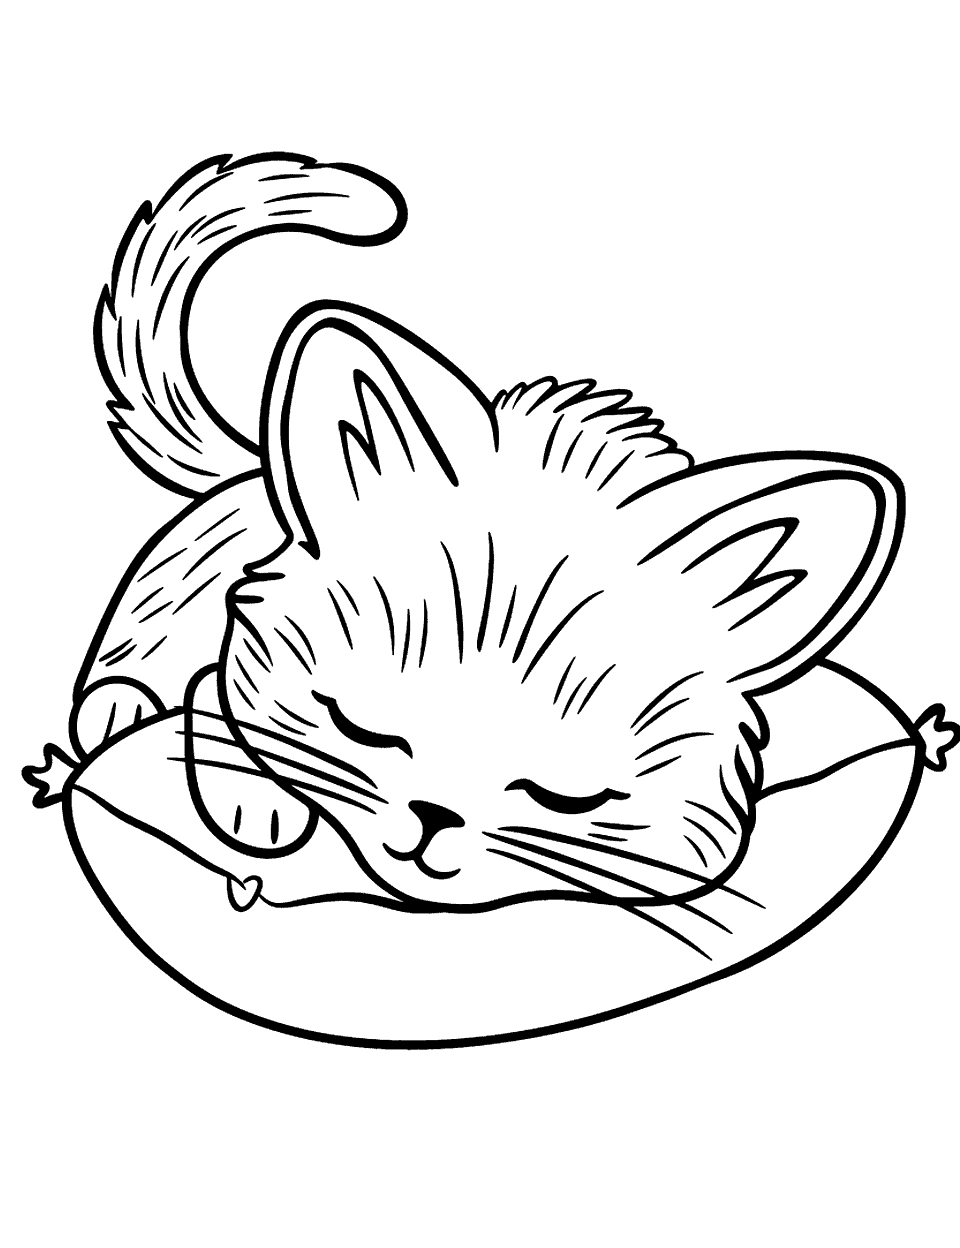 Sleepy Kitten Toddler Coloring Page - A cute kitten curled up and sleeping on a soft cushion.